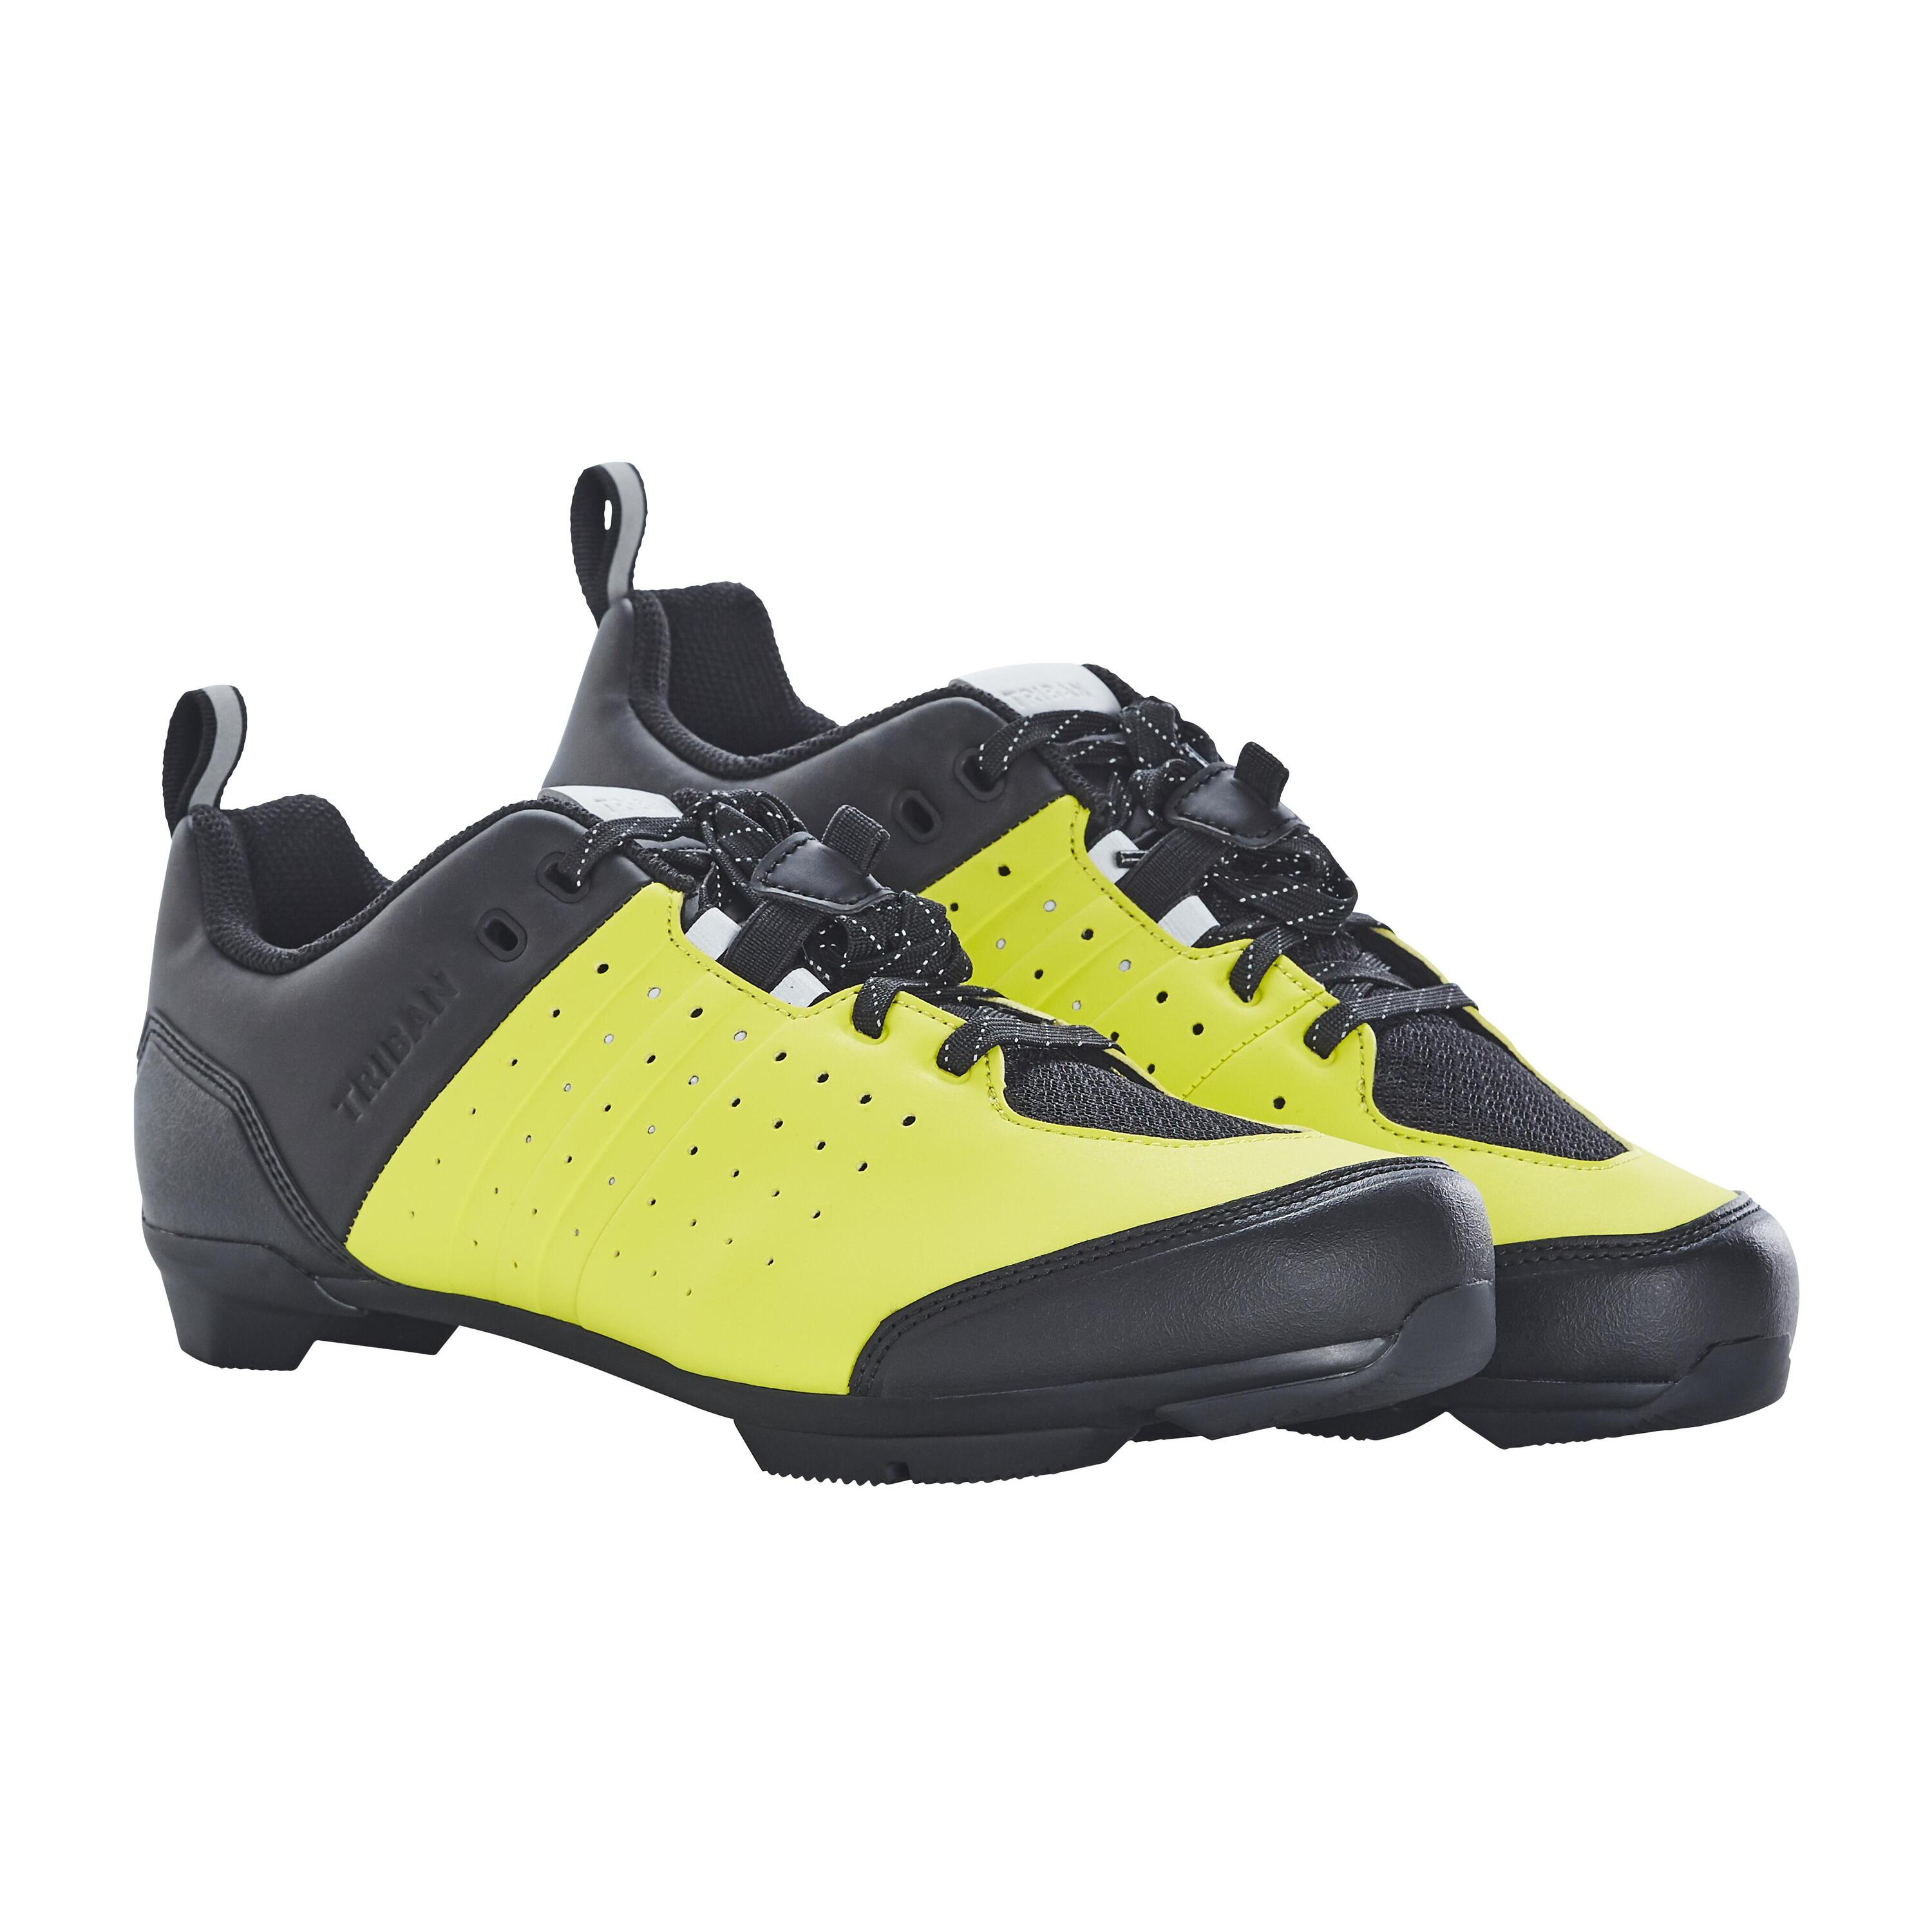 Road and Gravel Cycling Lace-Up SPD Shoes GRVL 500 - Yellow 2/5